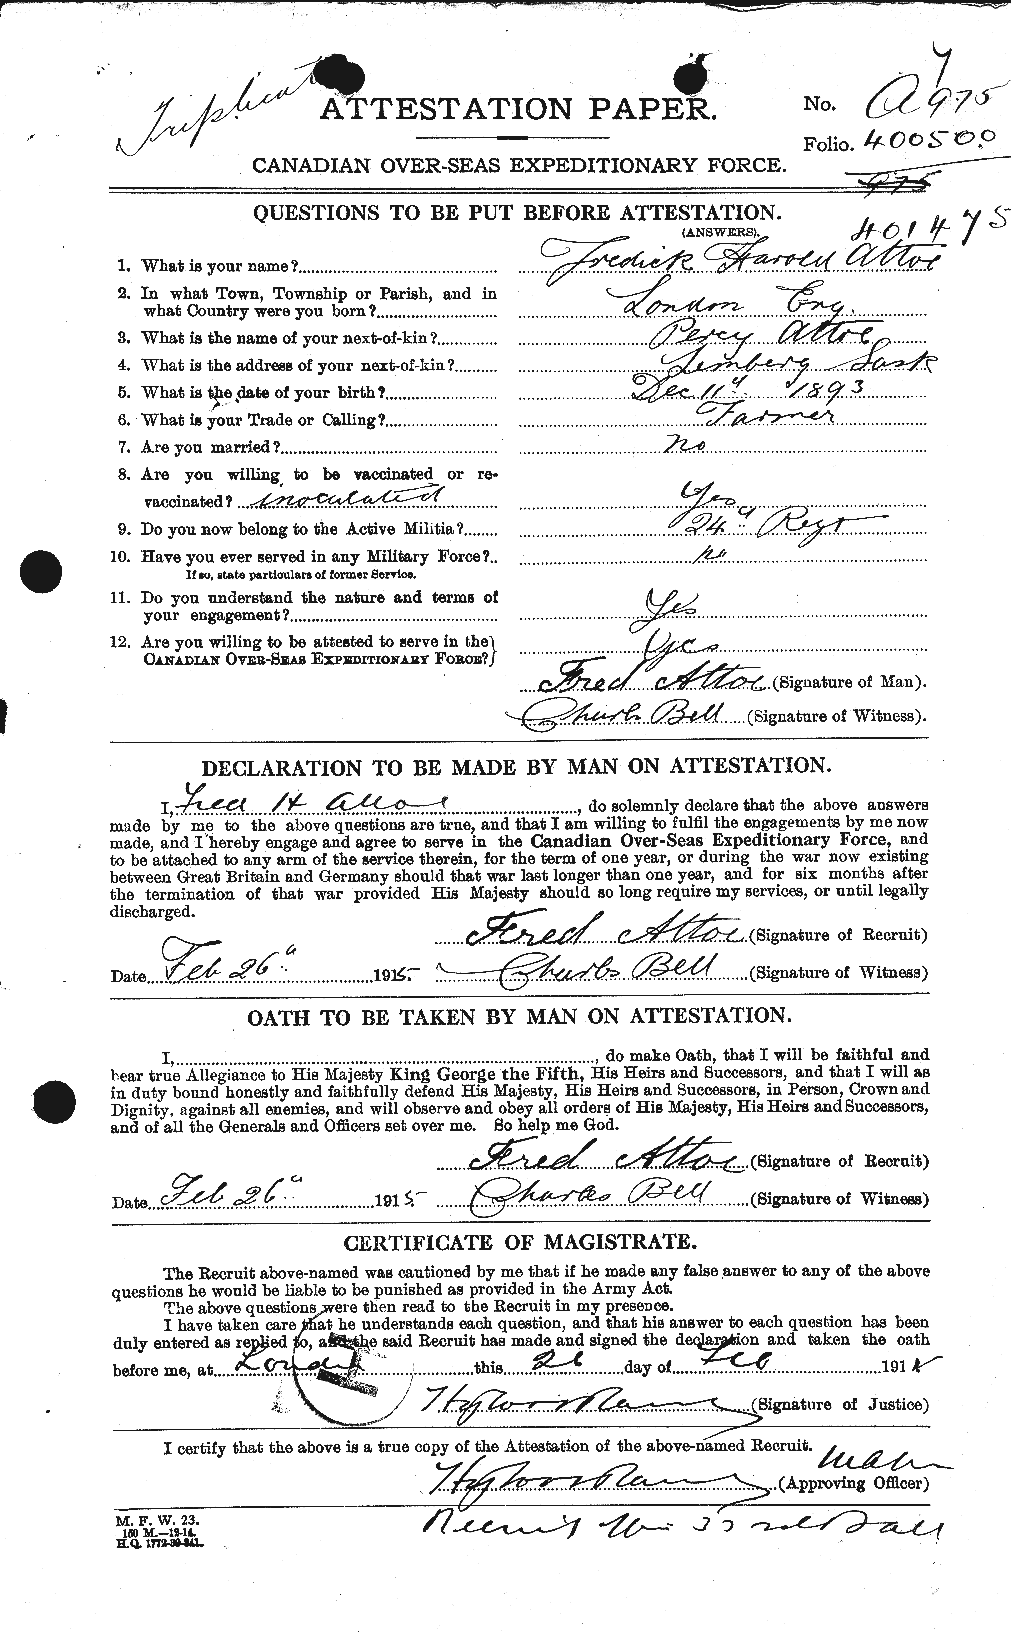 Personnel Records of the First World War - CEF 224088a